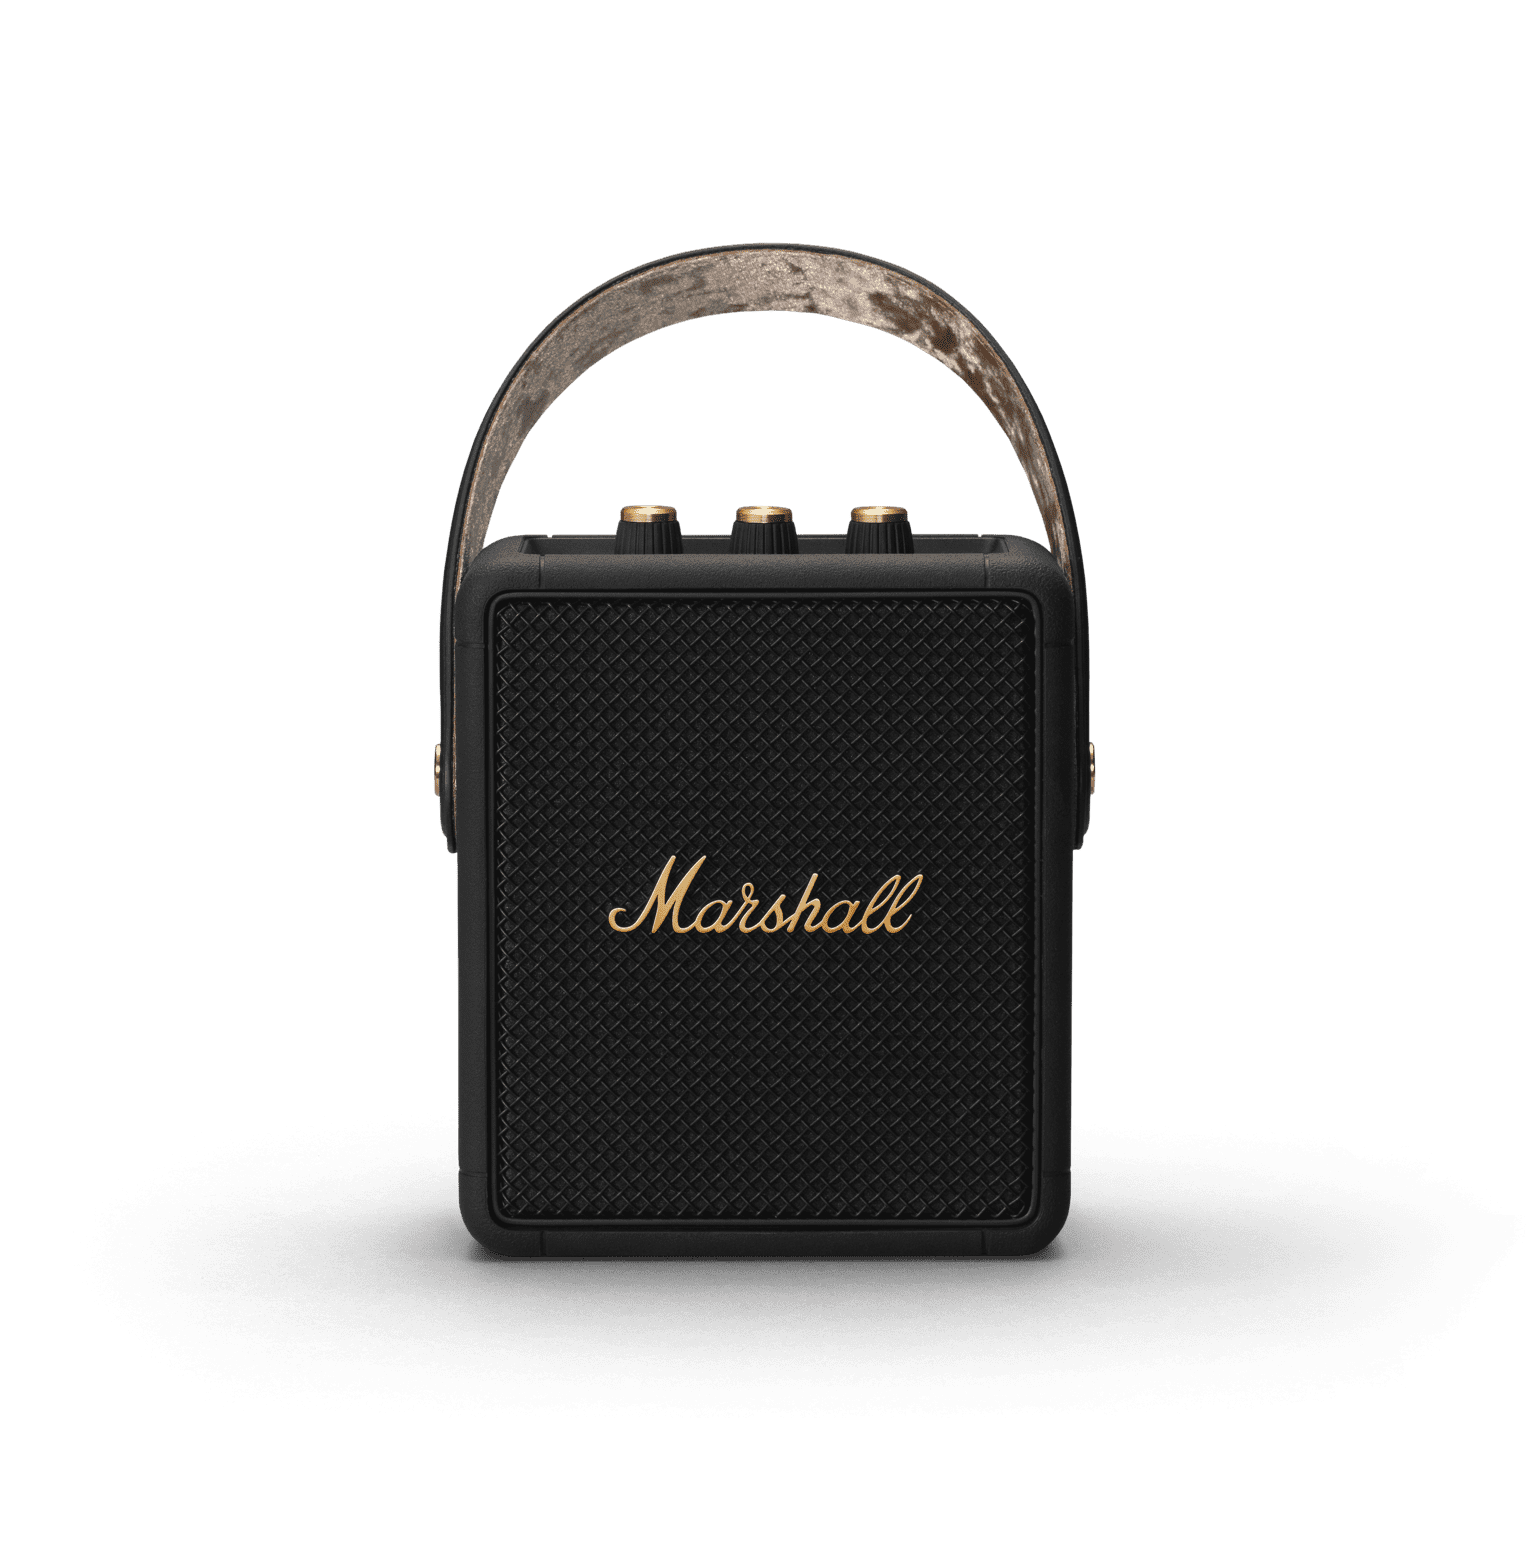 https://www.marshallheadphones.com/on/demandware.static/-/Sites-zs-master-catalog/default/dw3c9b80df/images/marshall/speakers/stockwell-ii/pitch-black-and-brass/large/Stockwell-II_Brass_POS-1.png